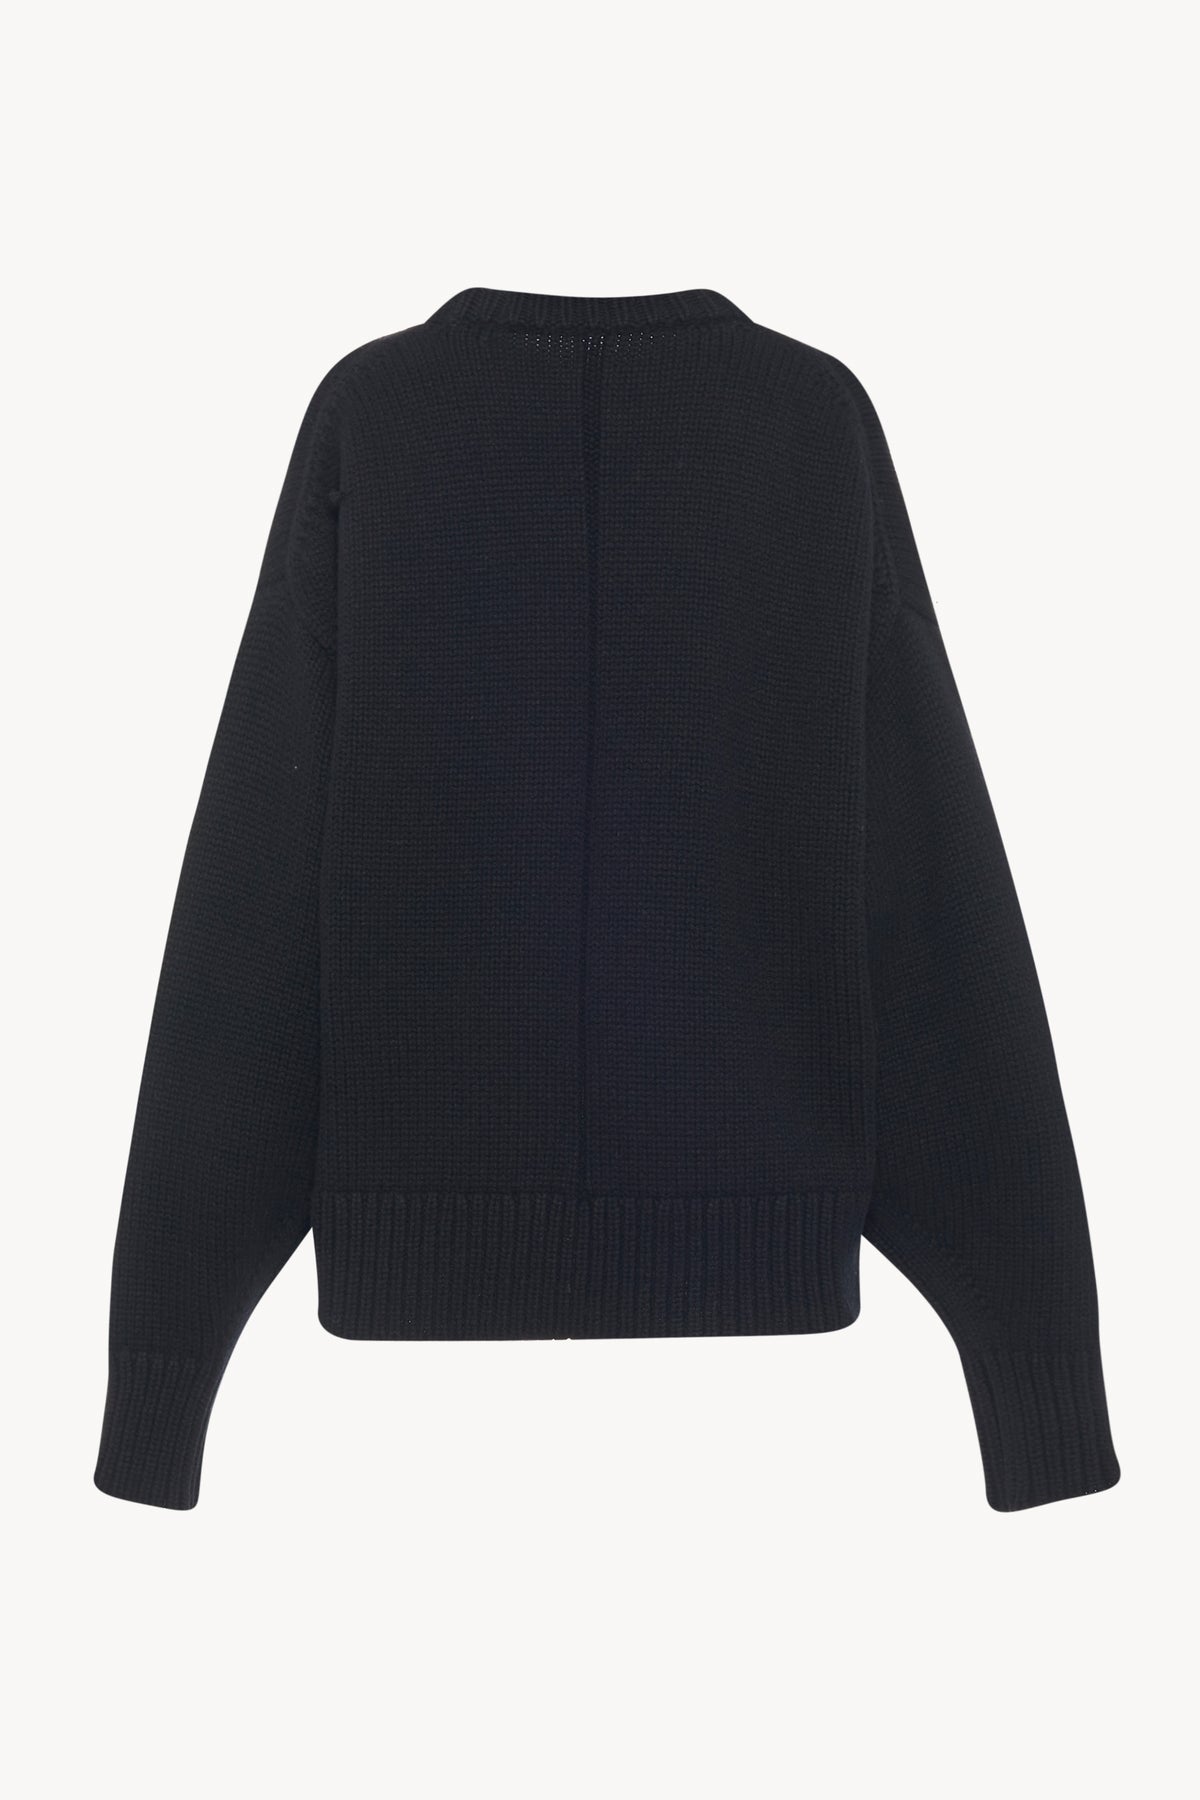 Navy Ophelia wool-blend sweater, The Row